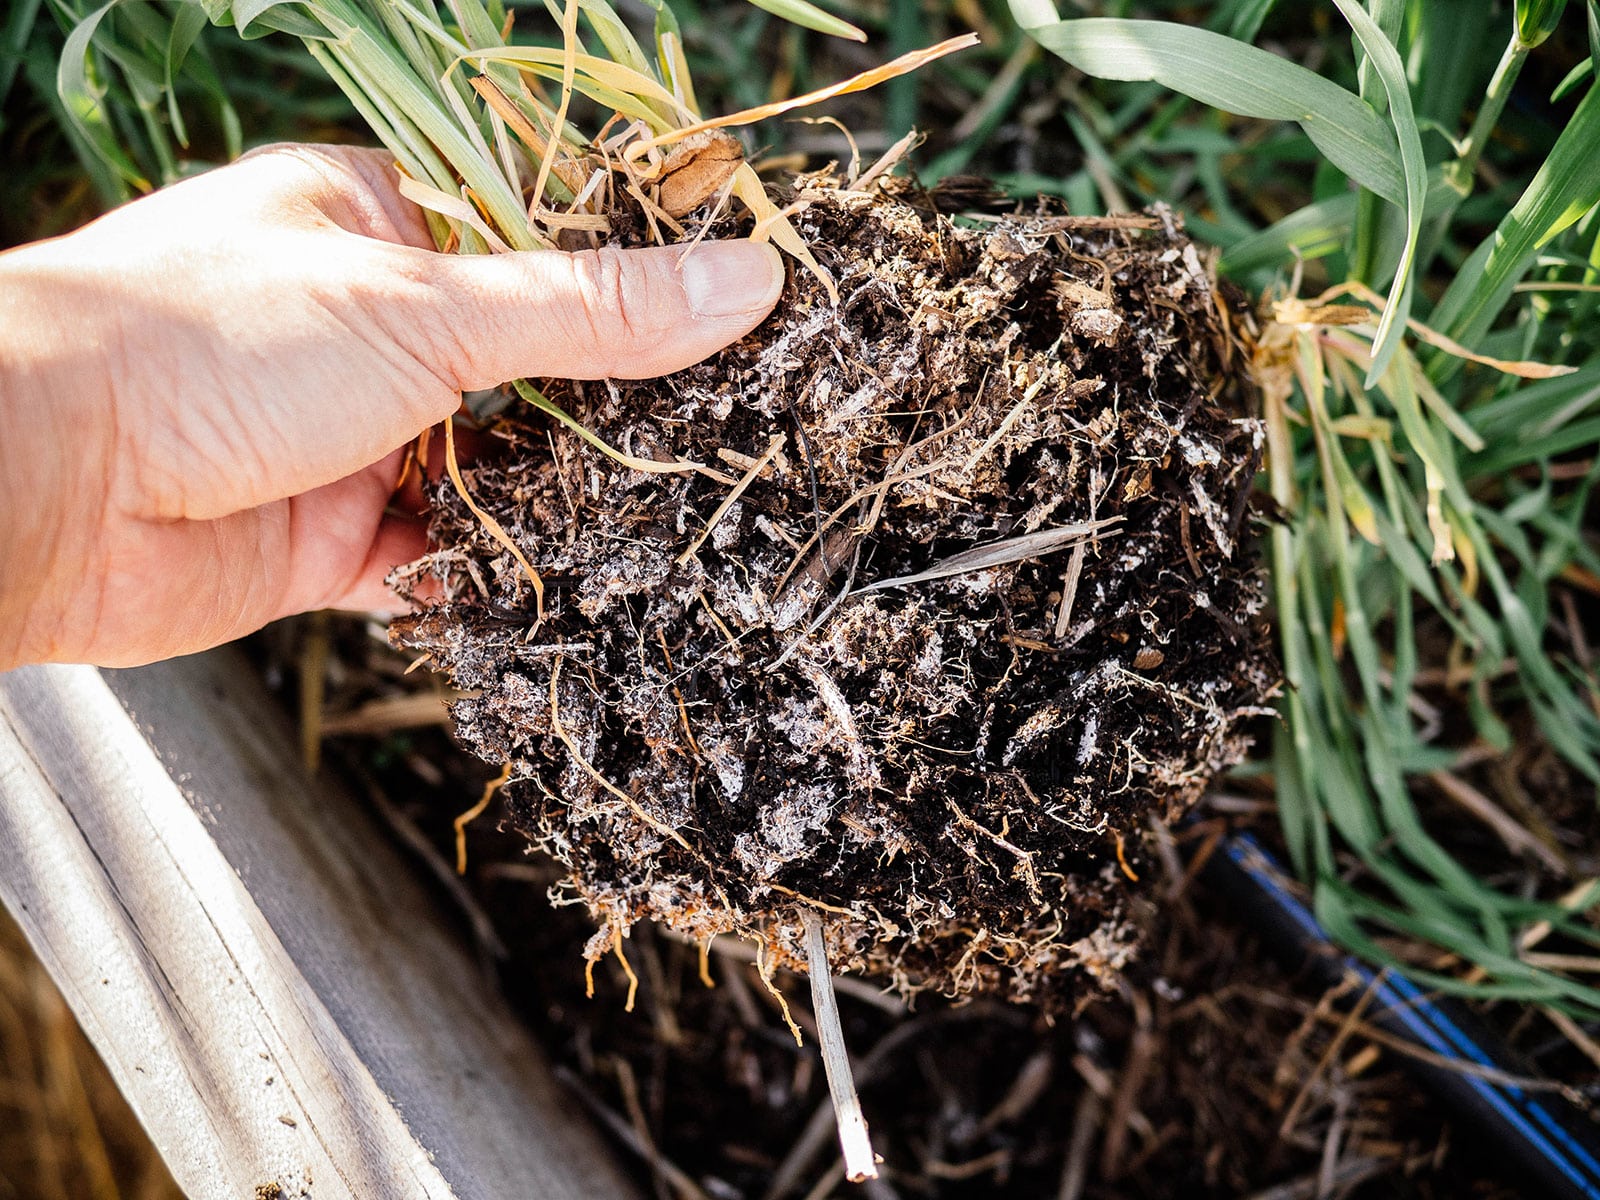 Hand holding a mass of plant roots from winter rye, showing a network of mycorrhizae growing on the roots